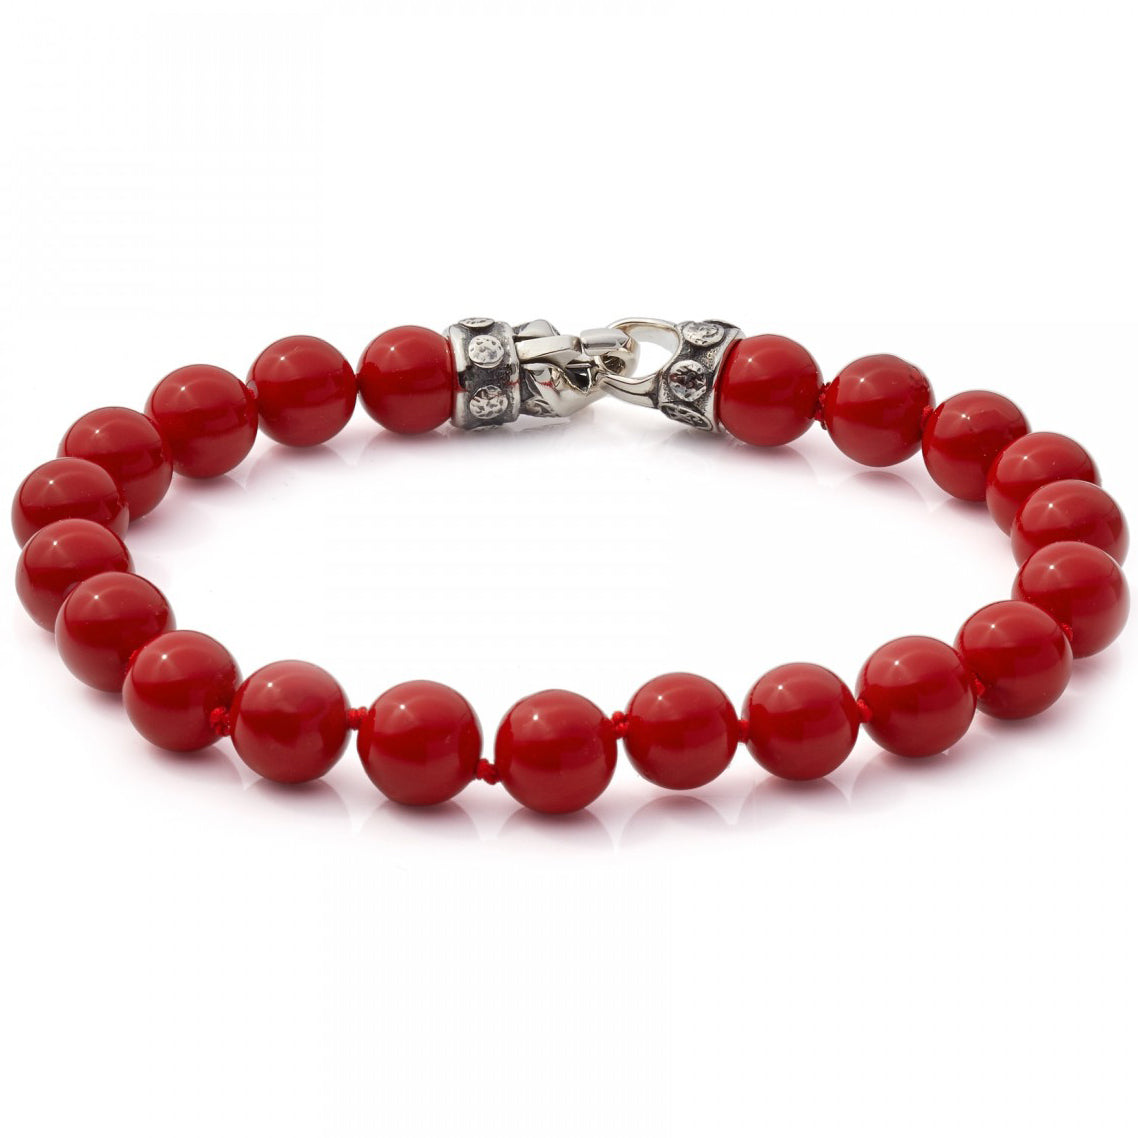 Scott Kay 8mm Beaded Red Bracelet For Men with Sterling Silver Clasp, 8.5 In